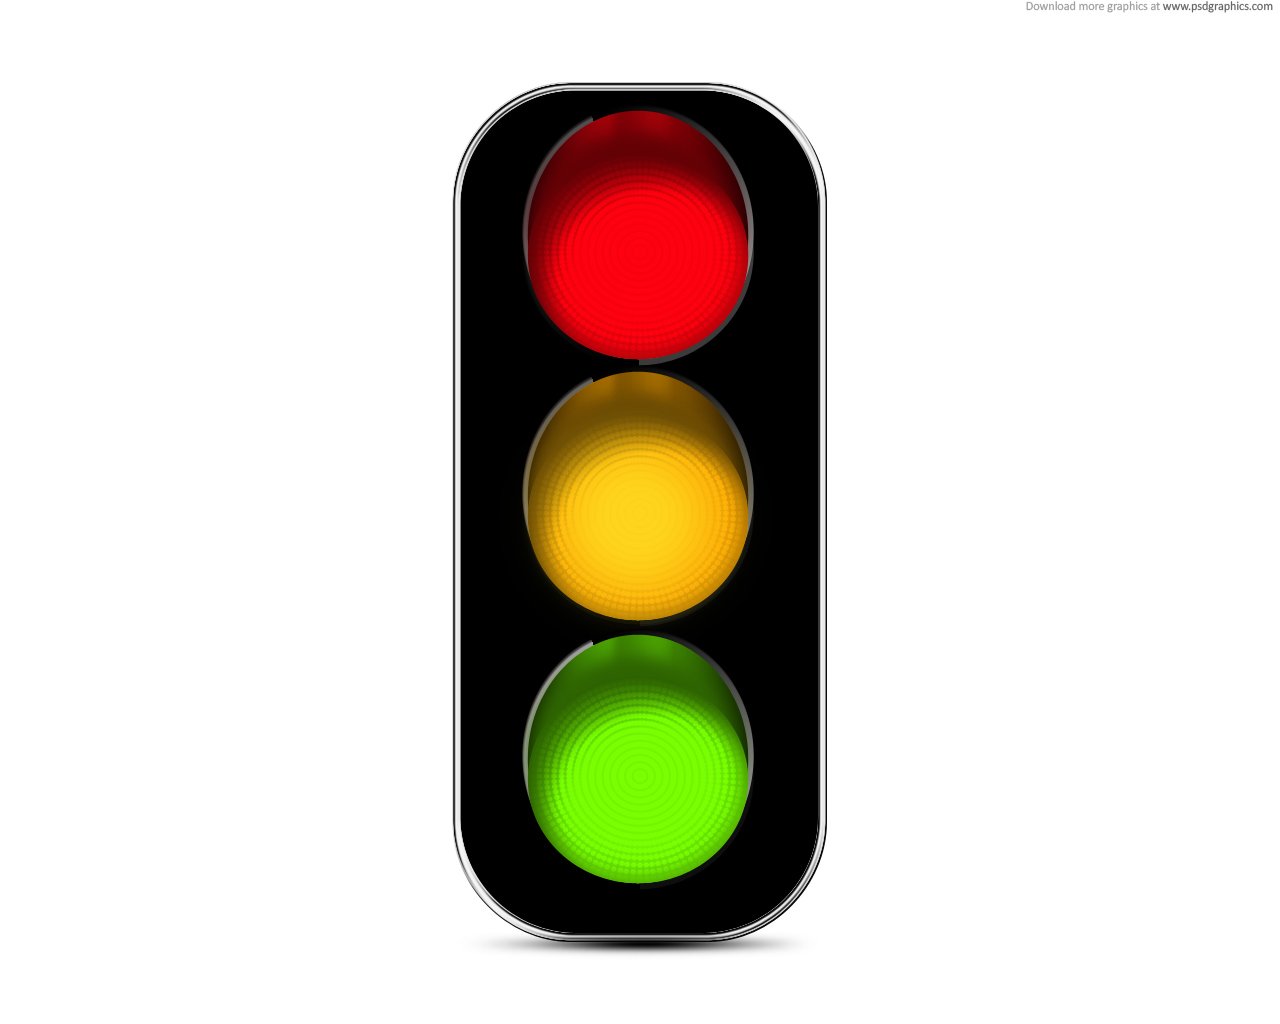 Pictures Of Traffic Lights 76